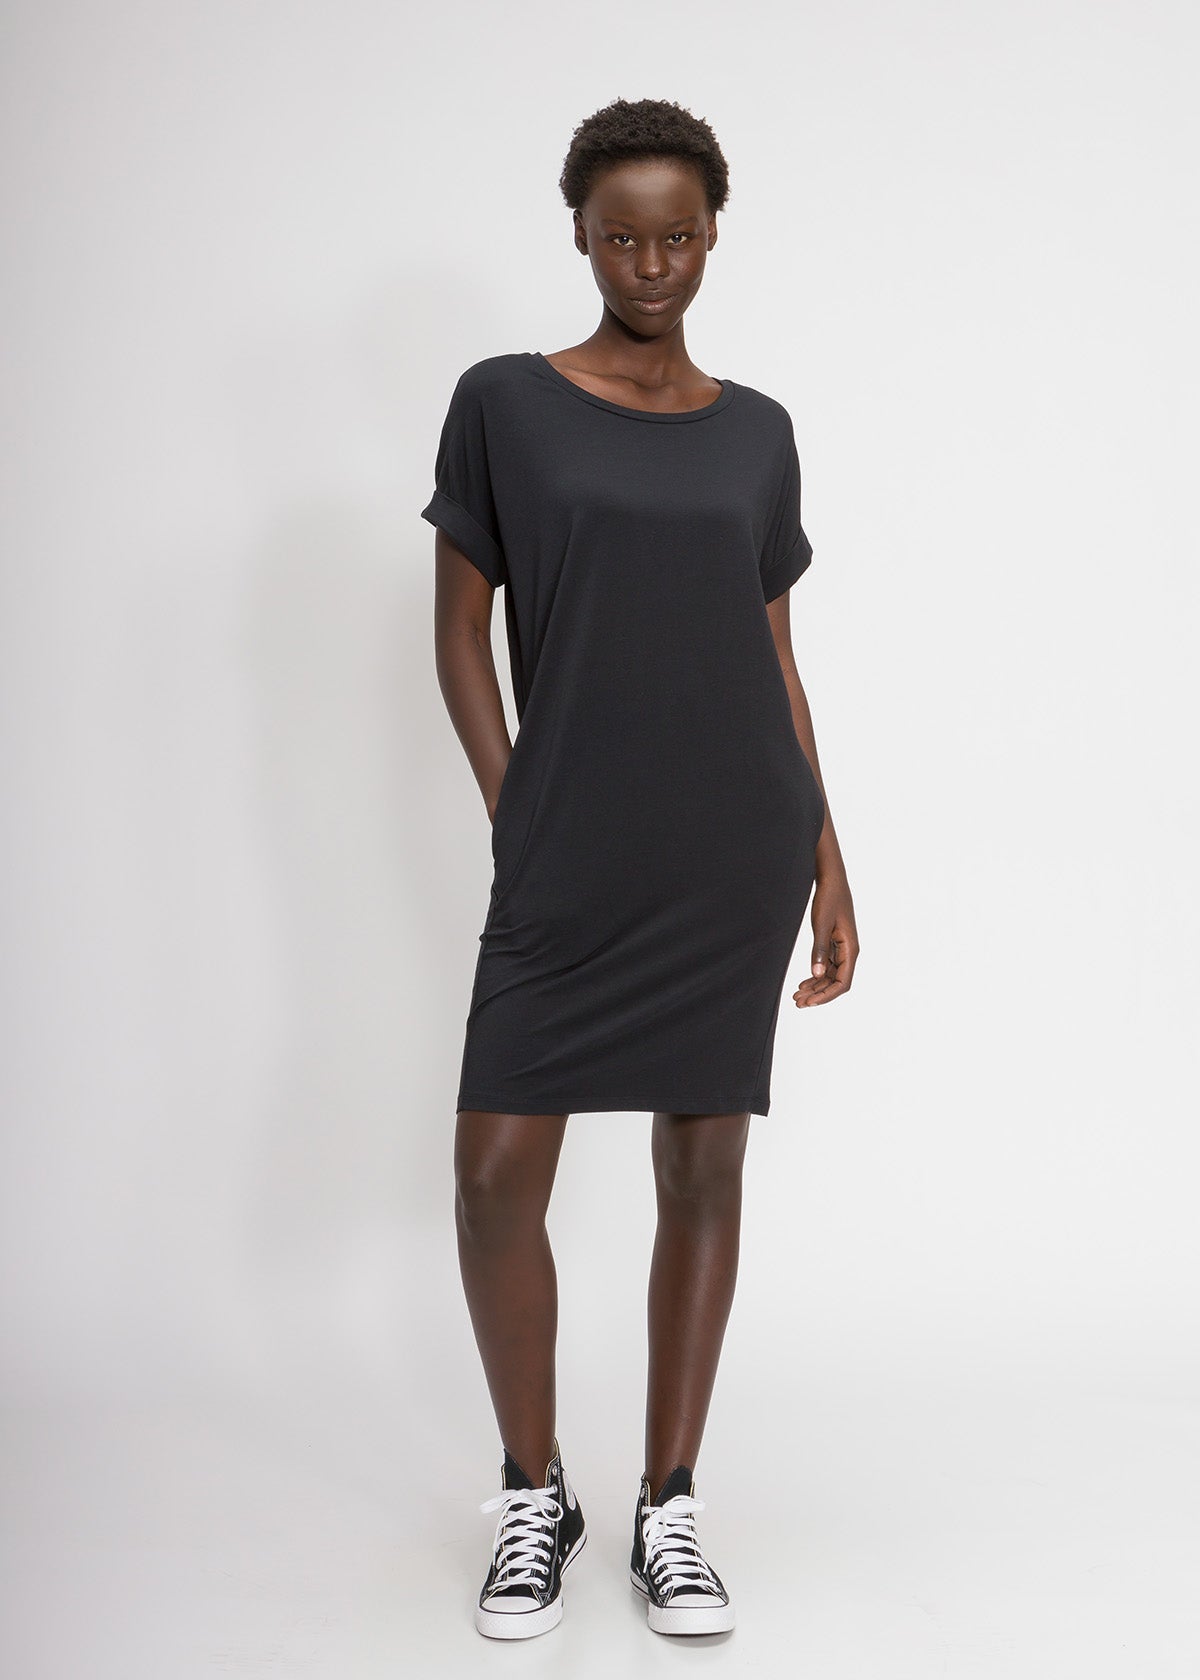 Dress - Women's Relaxed T-Shirt Dress With Pockets In Supima Cotton Stretch